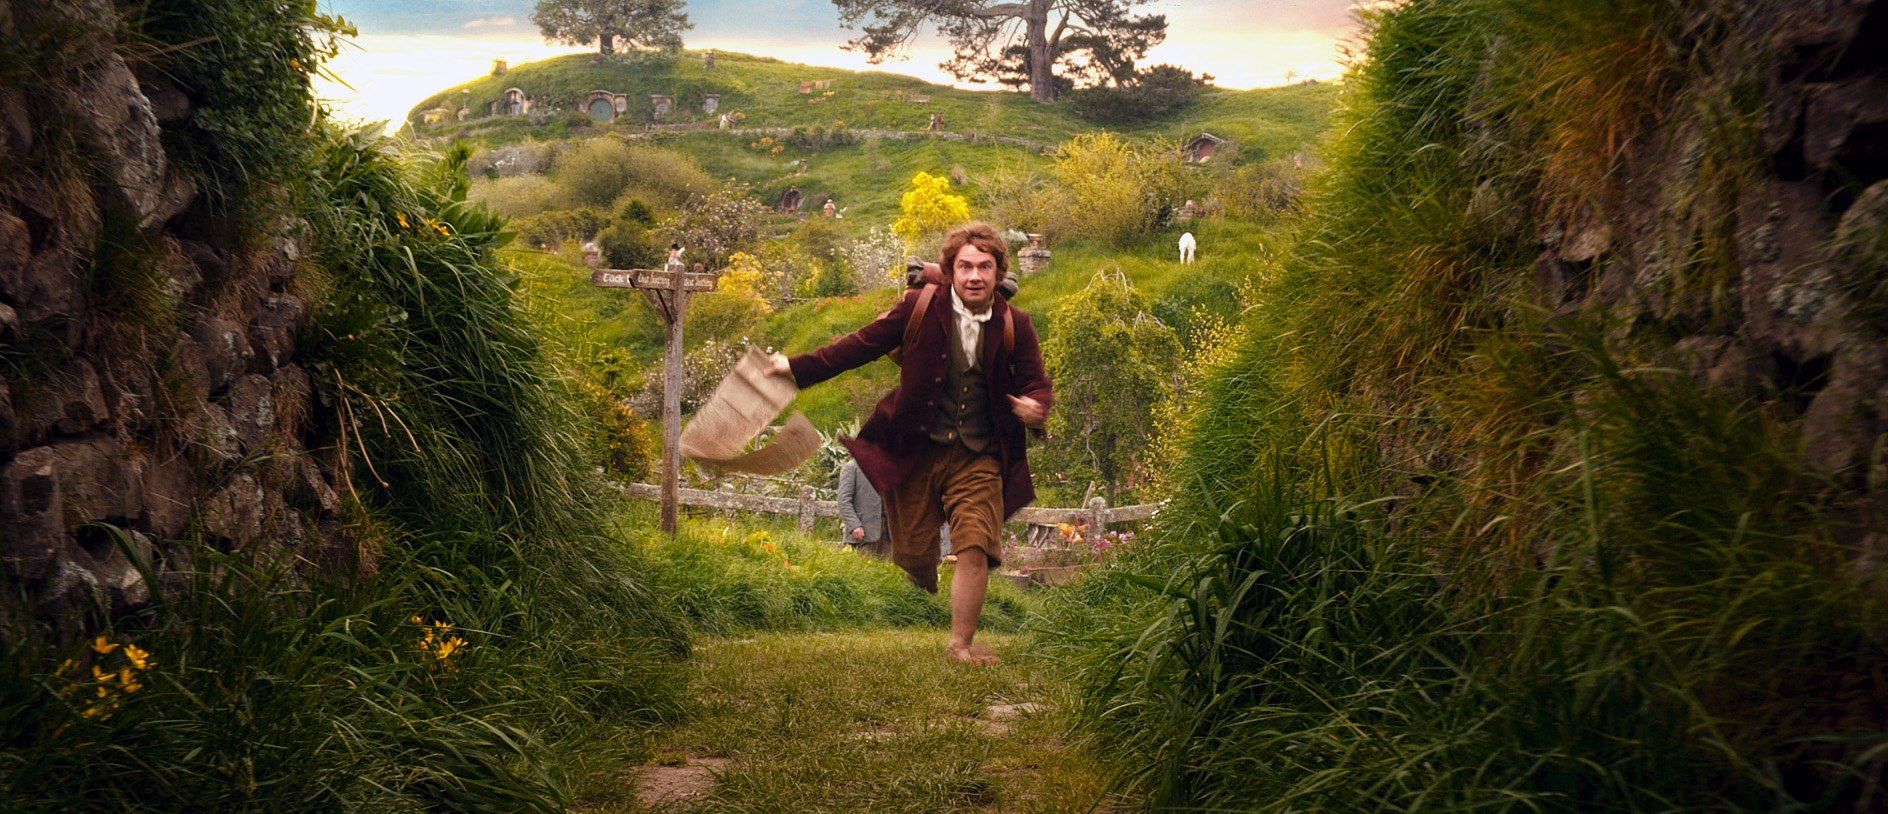 The Hobbit an Unexpected Journey Photo